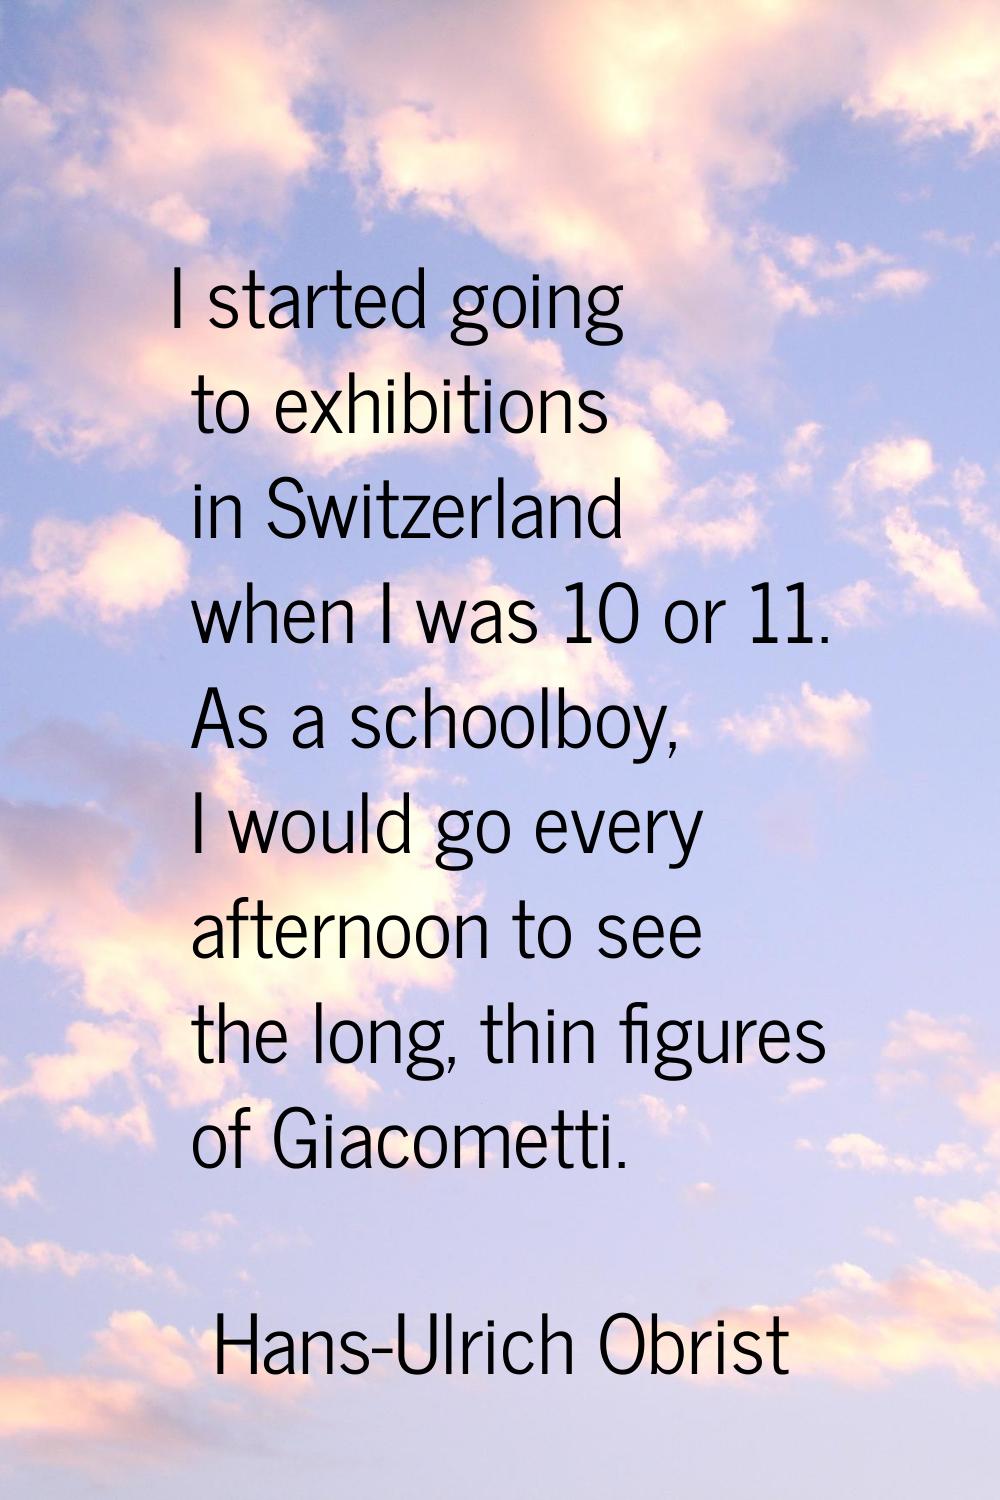 I started going to exhibitions in Switzerland when I was 10 or 11. As a schoolboy, I would go every